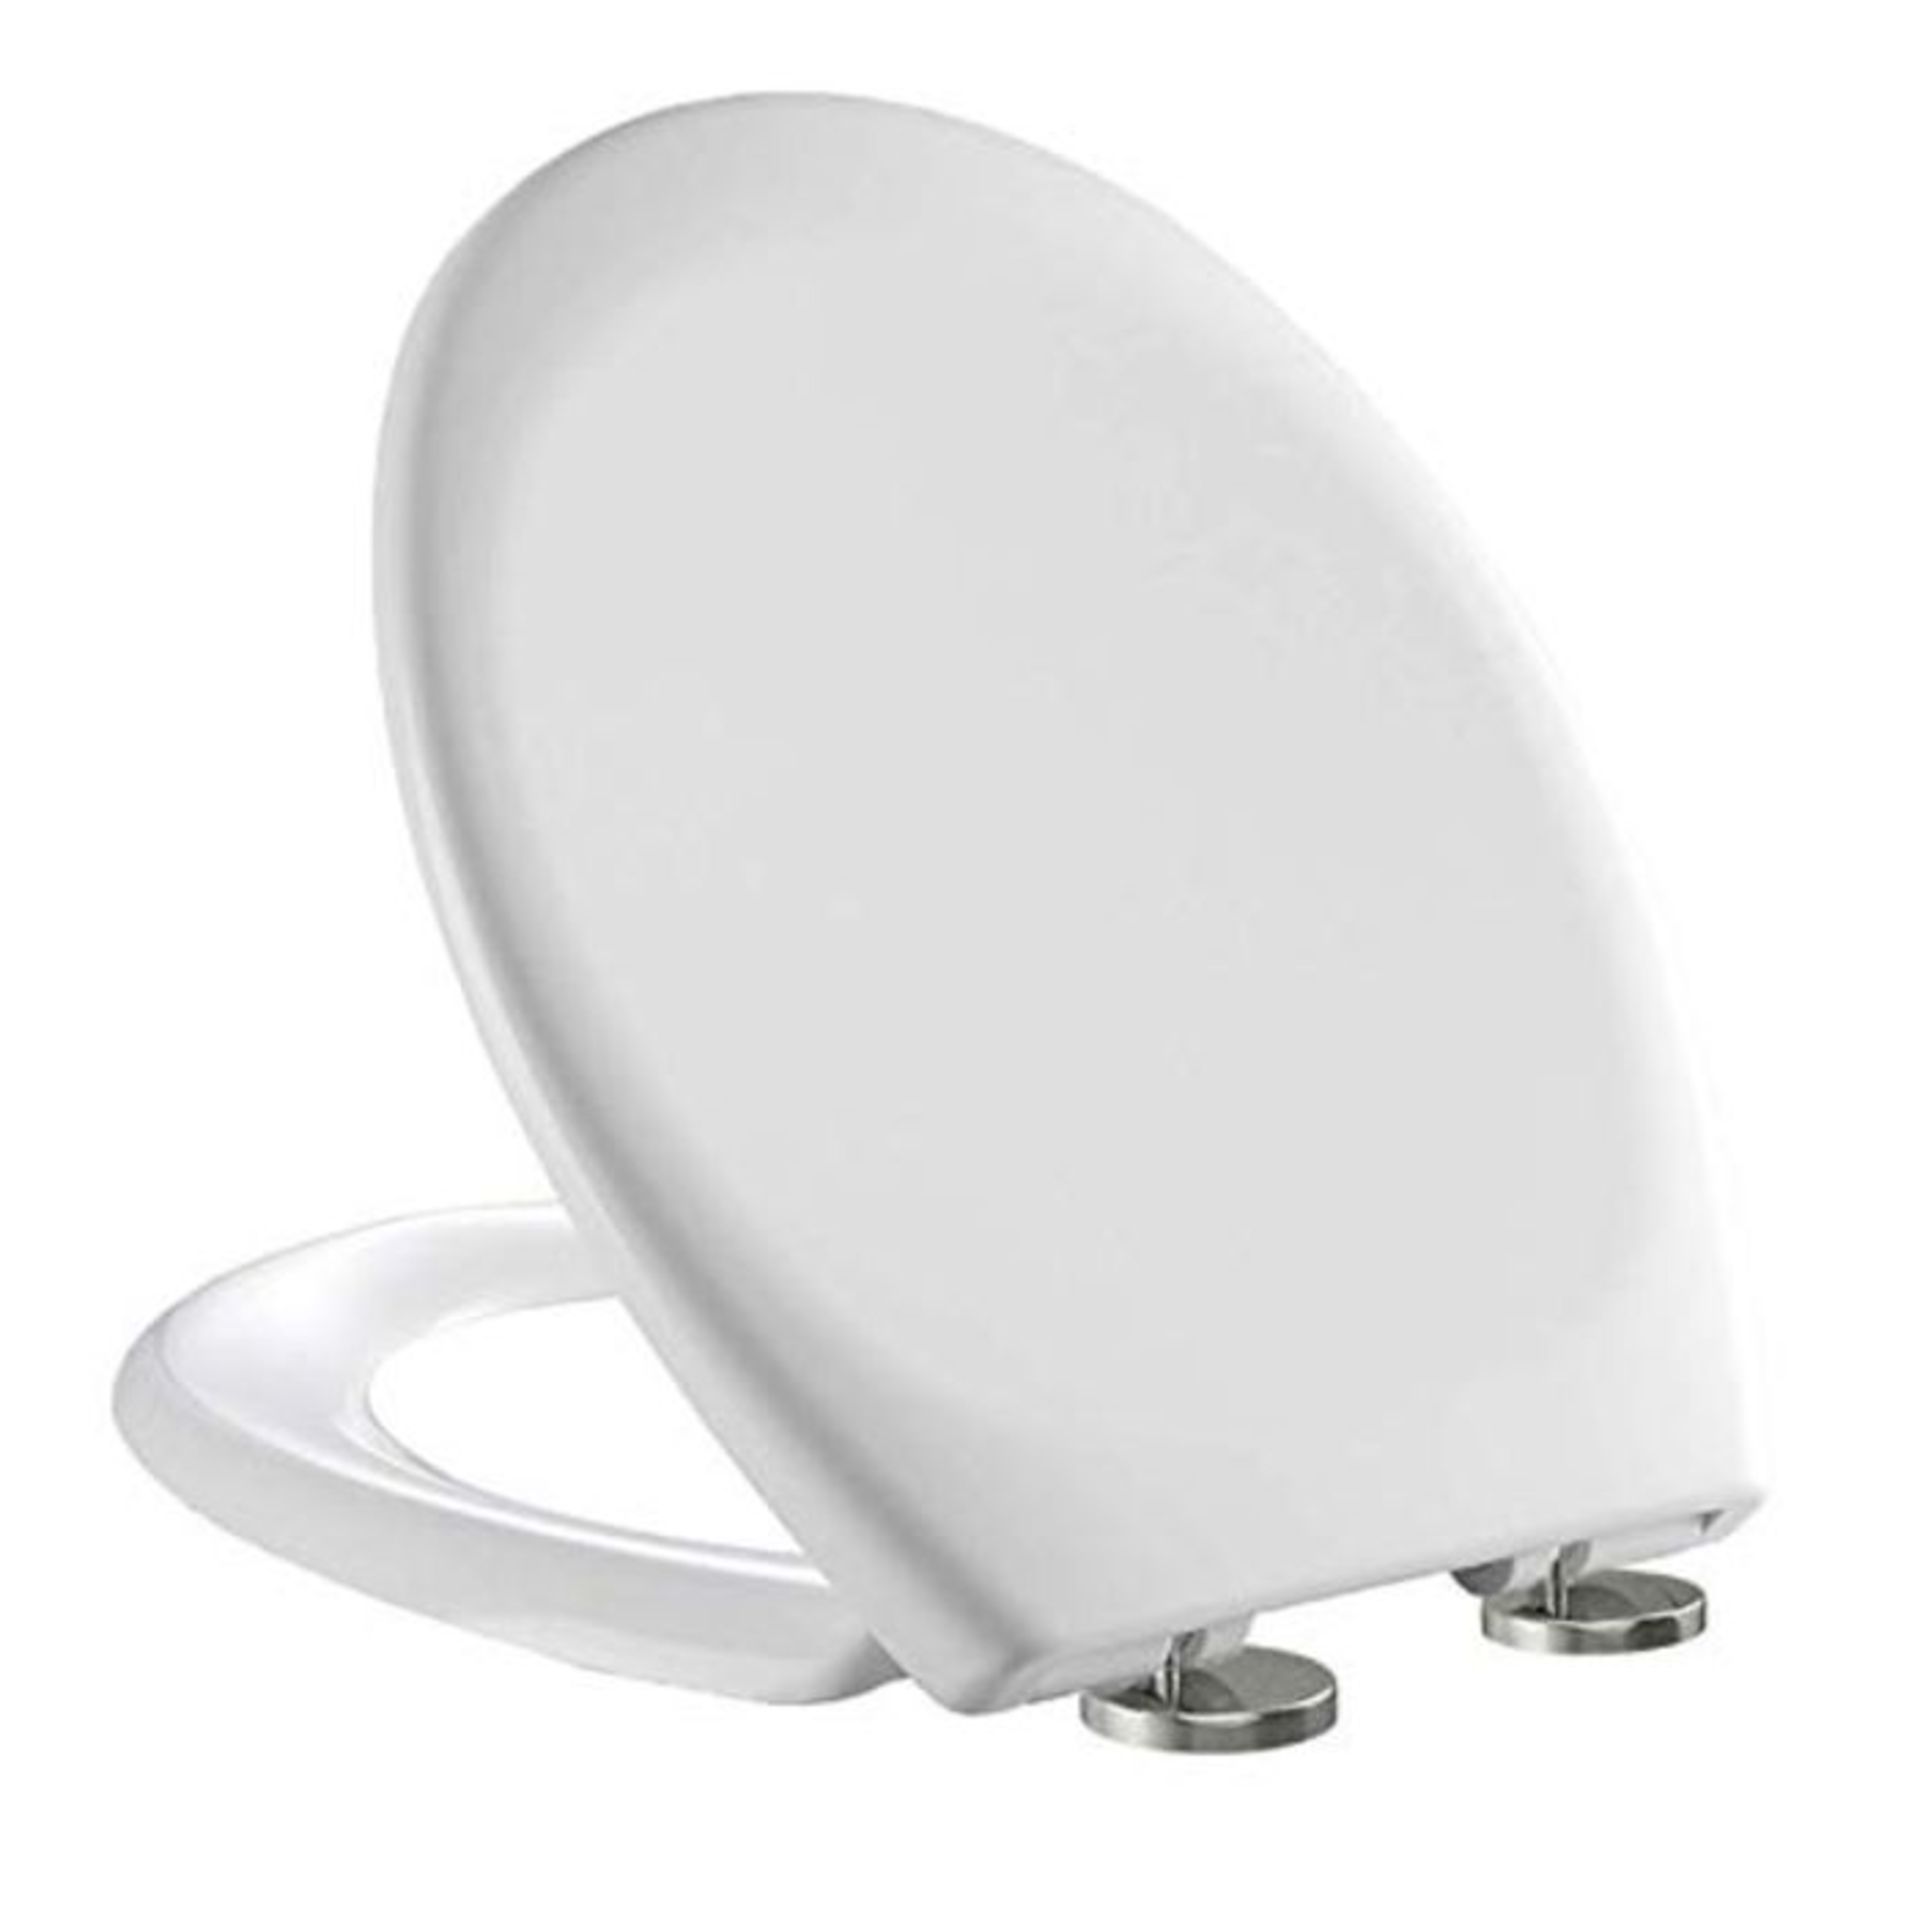 Toilet Seat featuring Soft-Close, Easy Clean, Top Fixing Hinges / OVAL LOO SEAT COVER